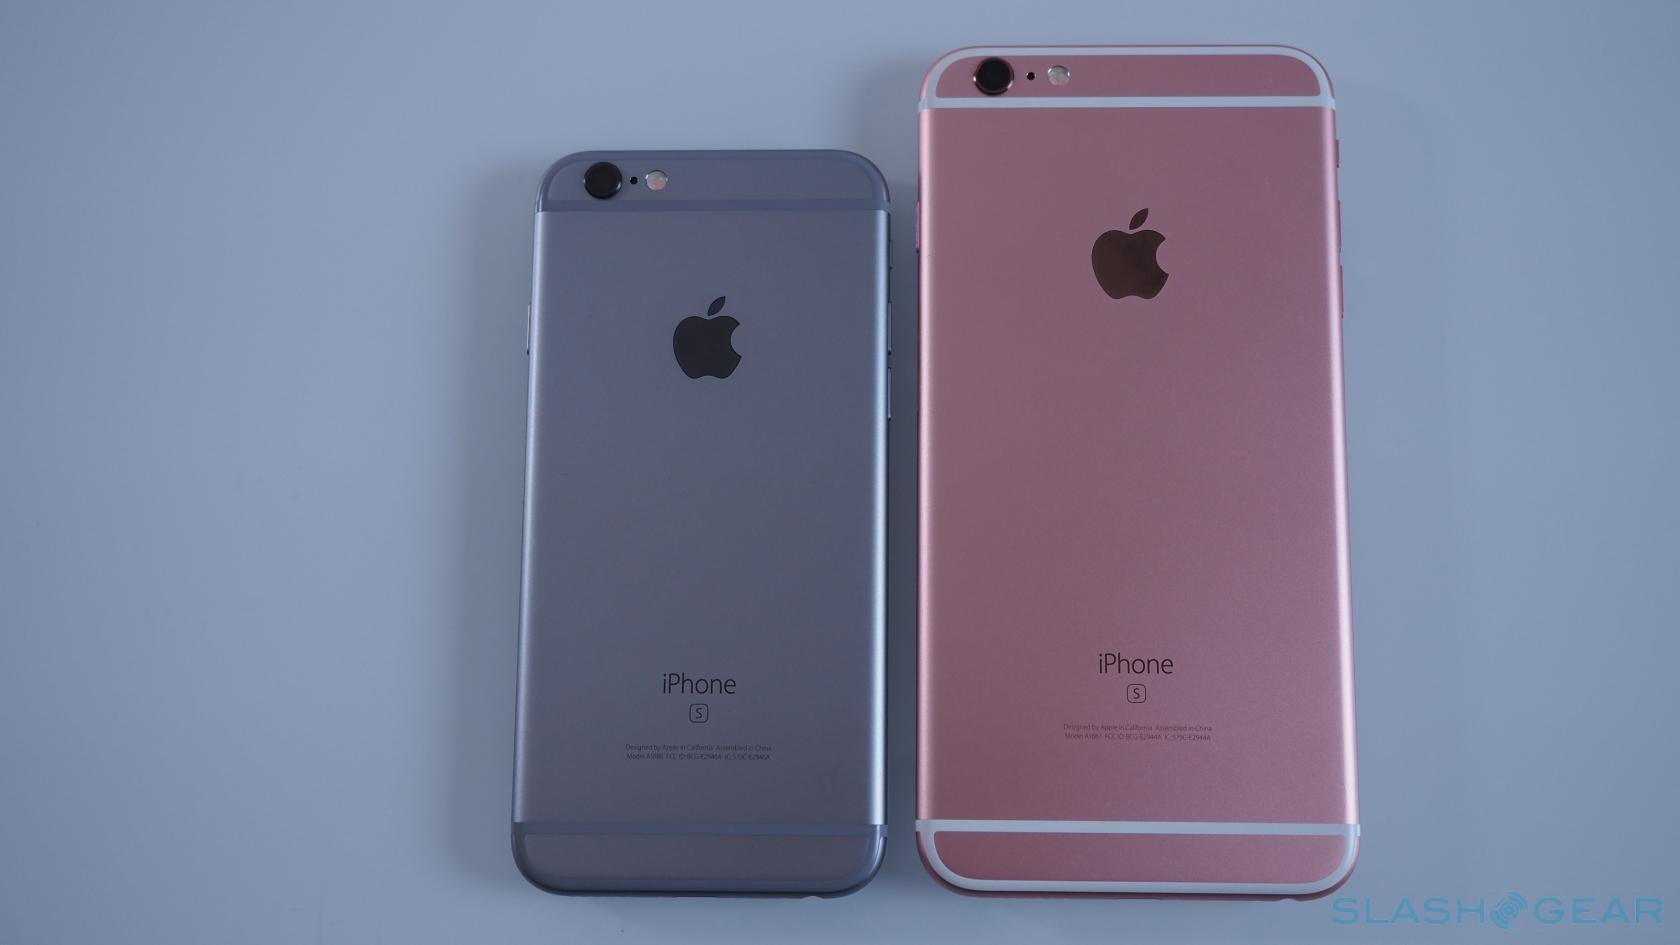 Iphone 6s And 6s Plus Gallery Sample Images And Videos Slashgear